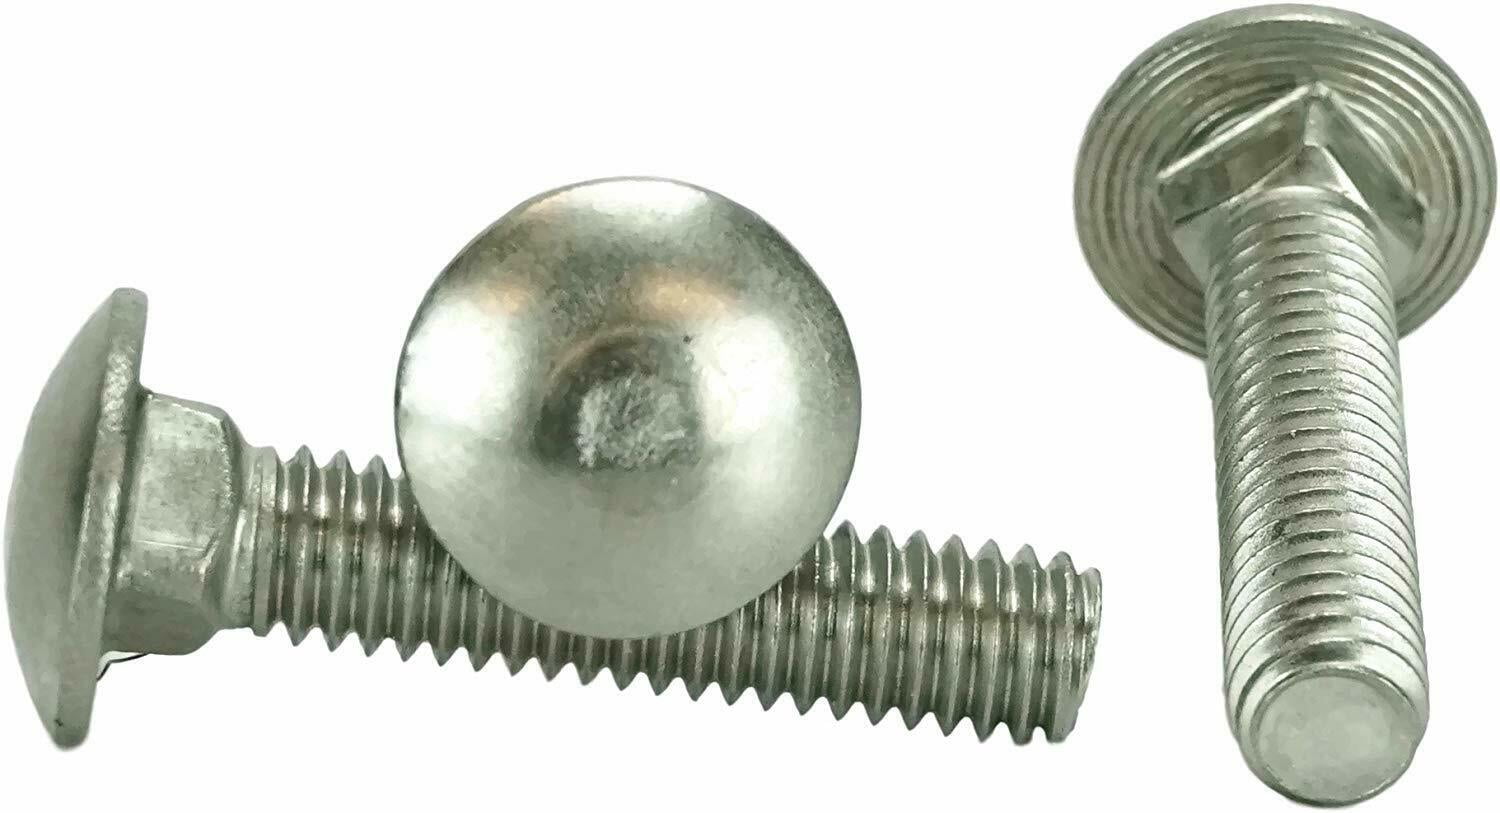 Qty 250 3/8-16 x 2 1/2" Stainless Steel Carriage Bolt 18-8 / 304 Full Thread Details about    